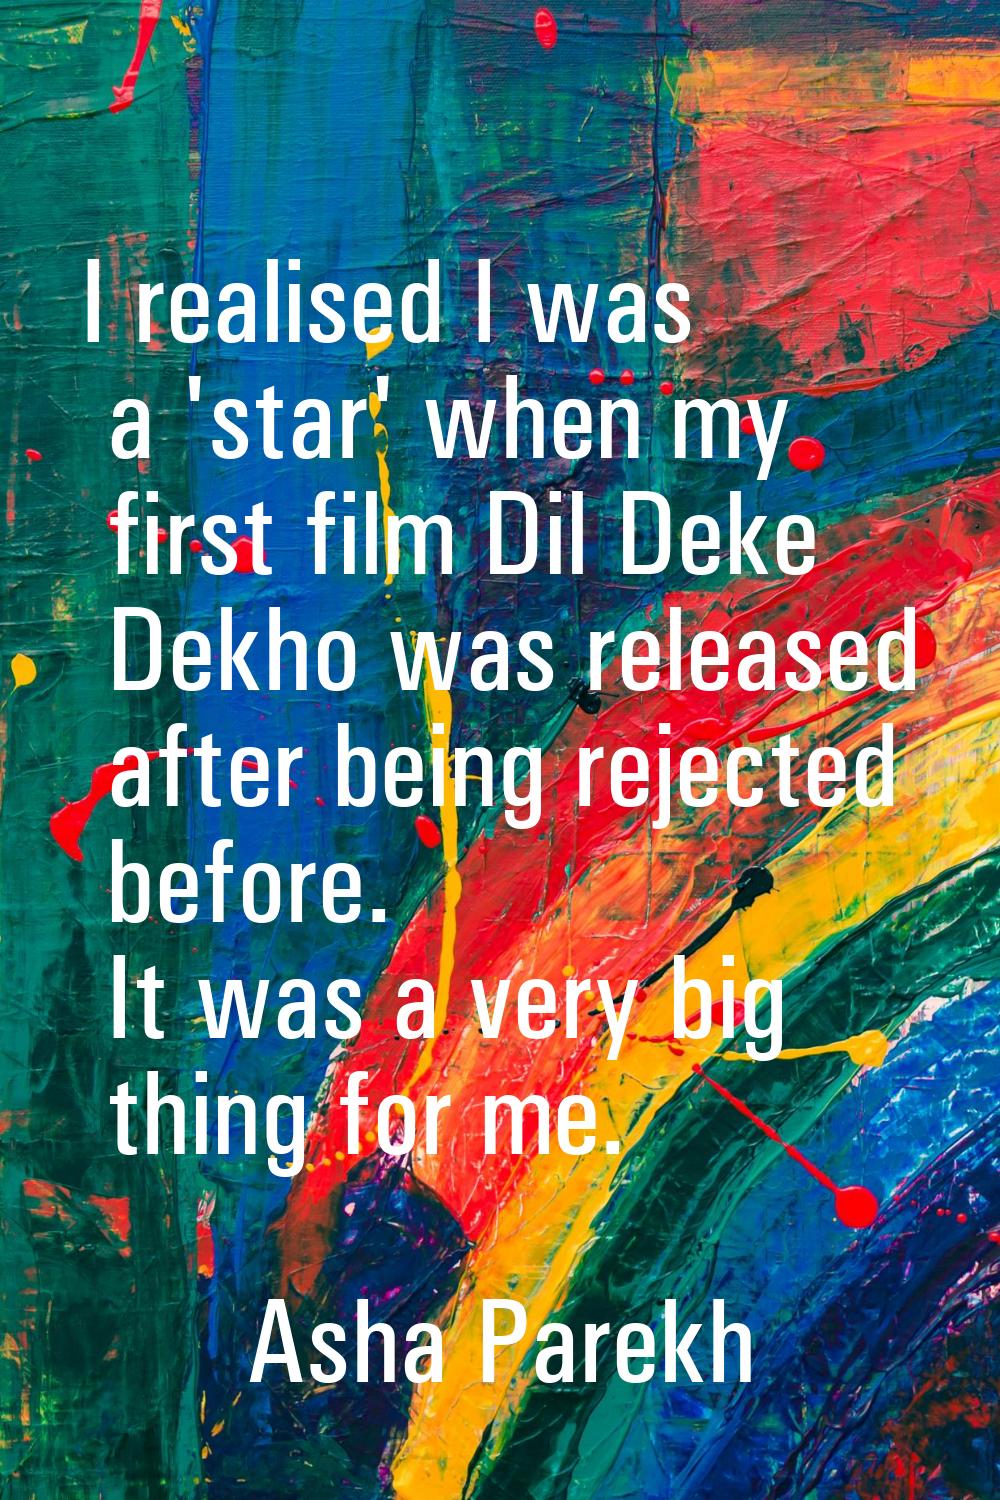 I realised I was a 'star' when my first film Dil Deke Dekho was released after being rejected befor